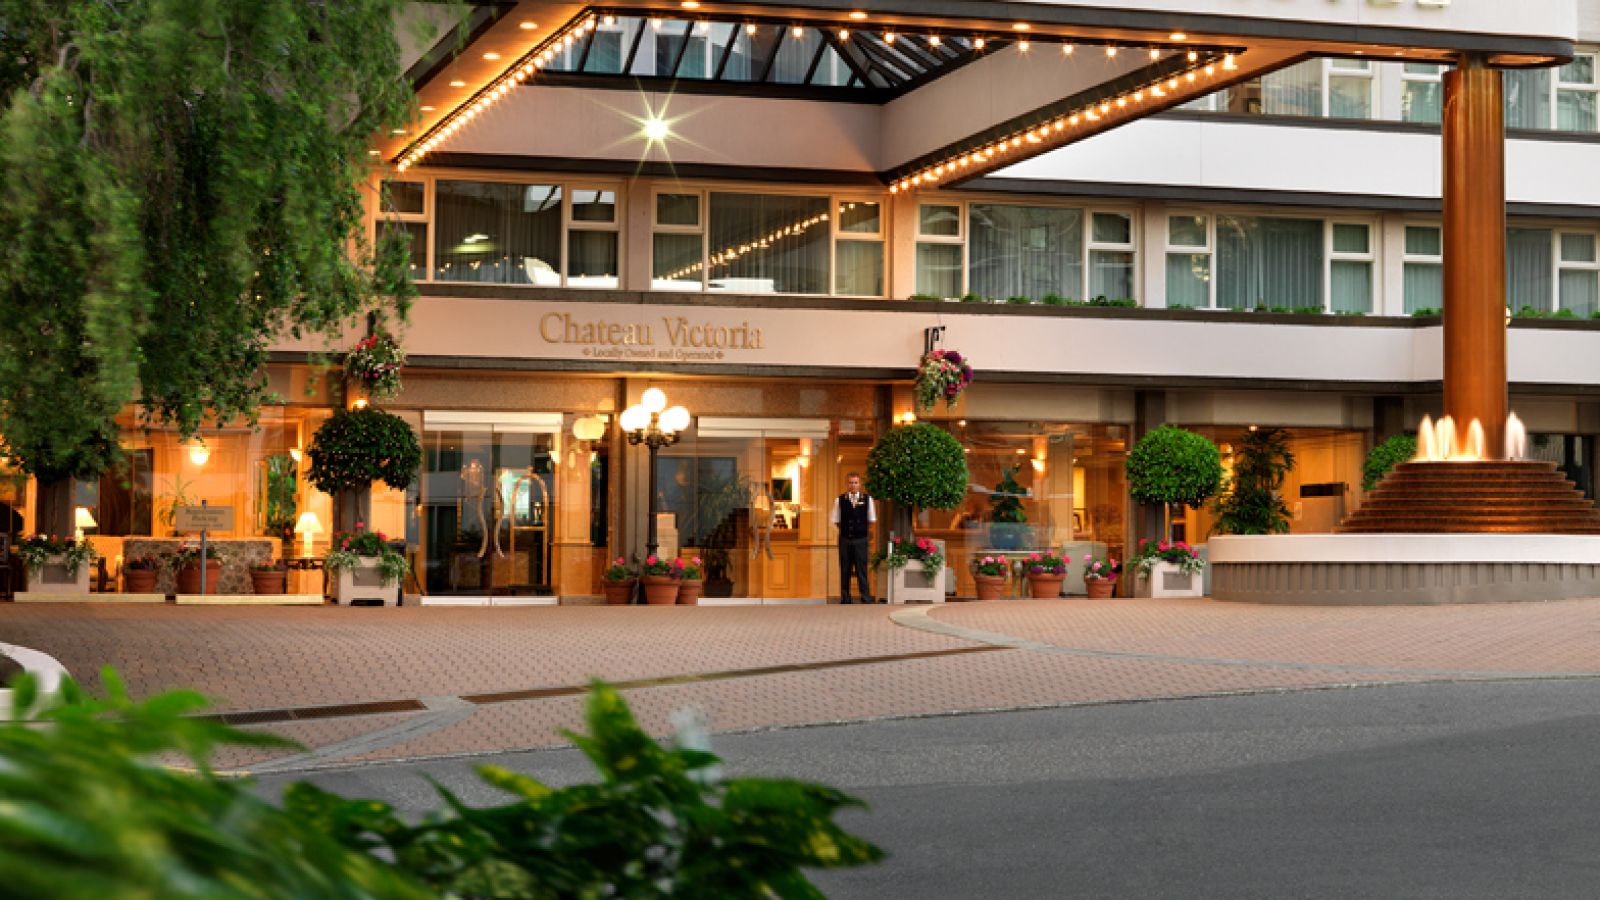 Chateau Victoria Hotel and Suites - Vancouver Island golf packages